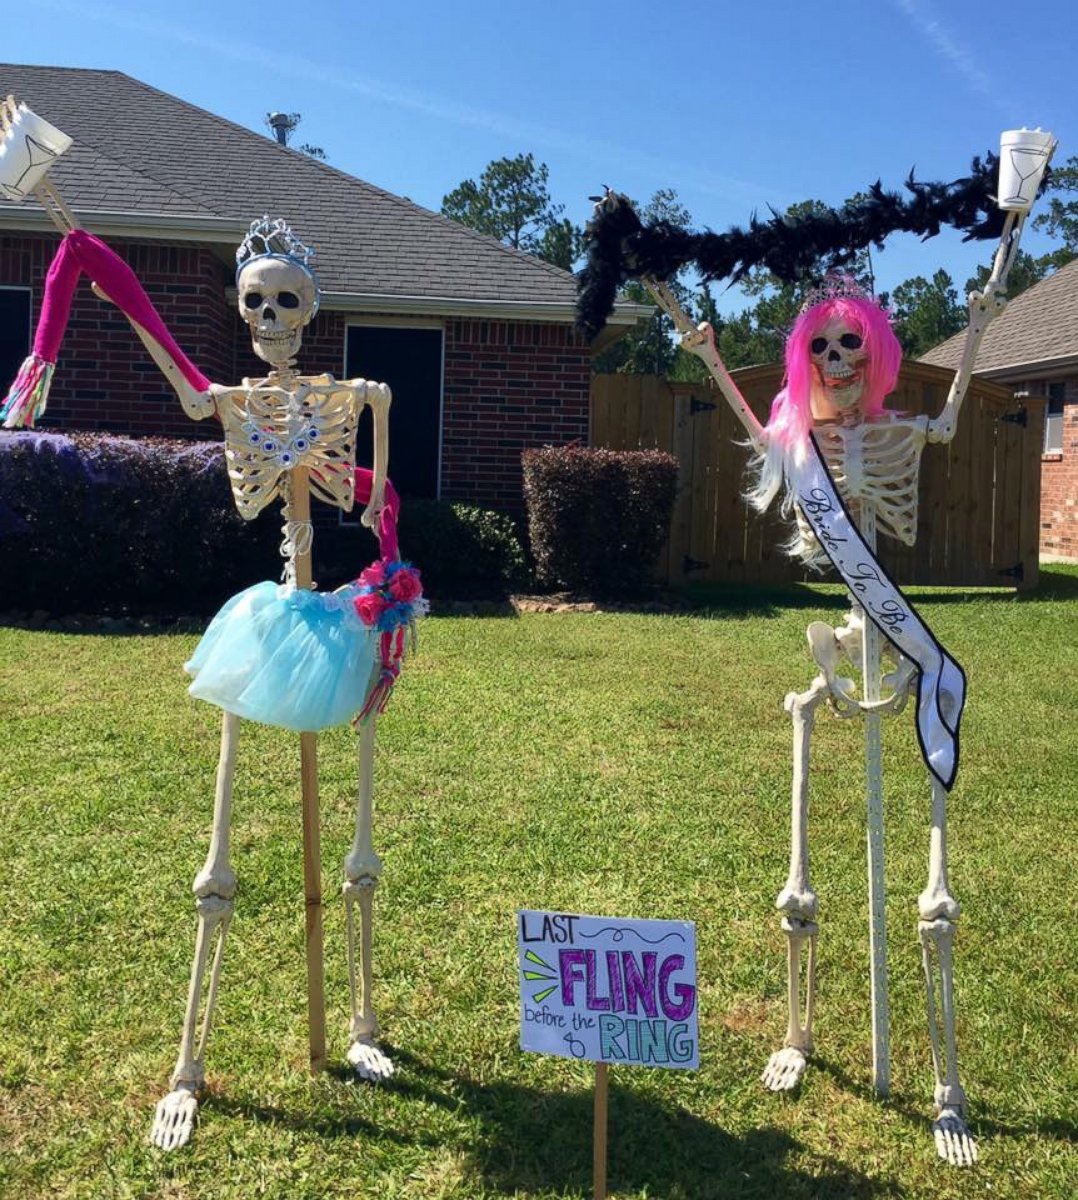 Video Family Puts Hilarious Spin on Halloween Decorations - ABC News